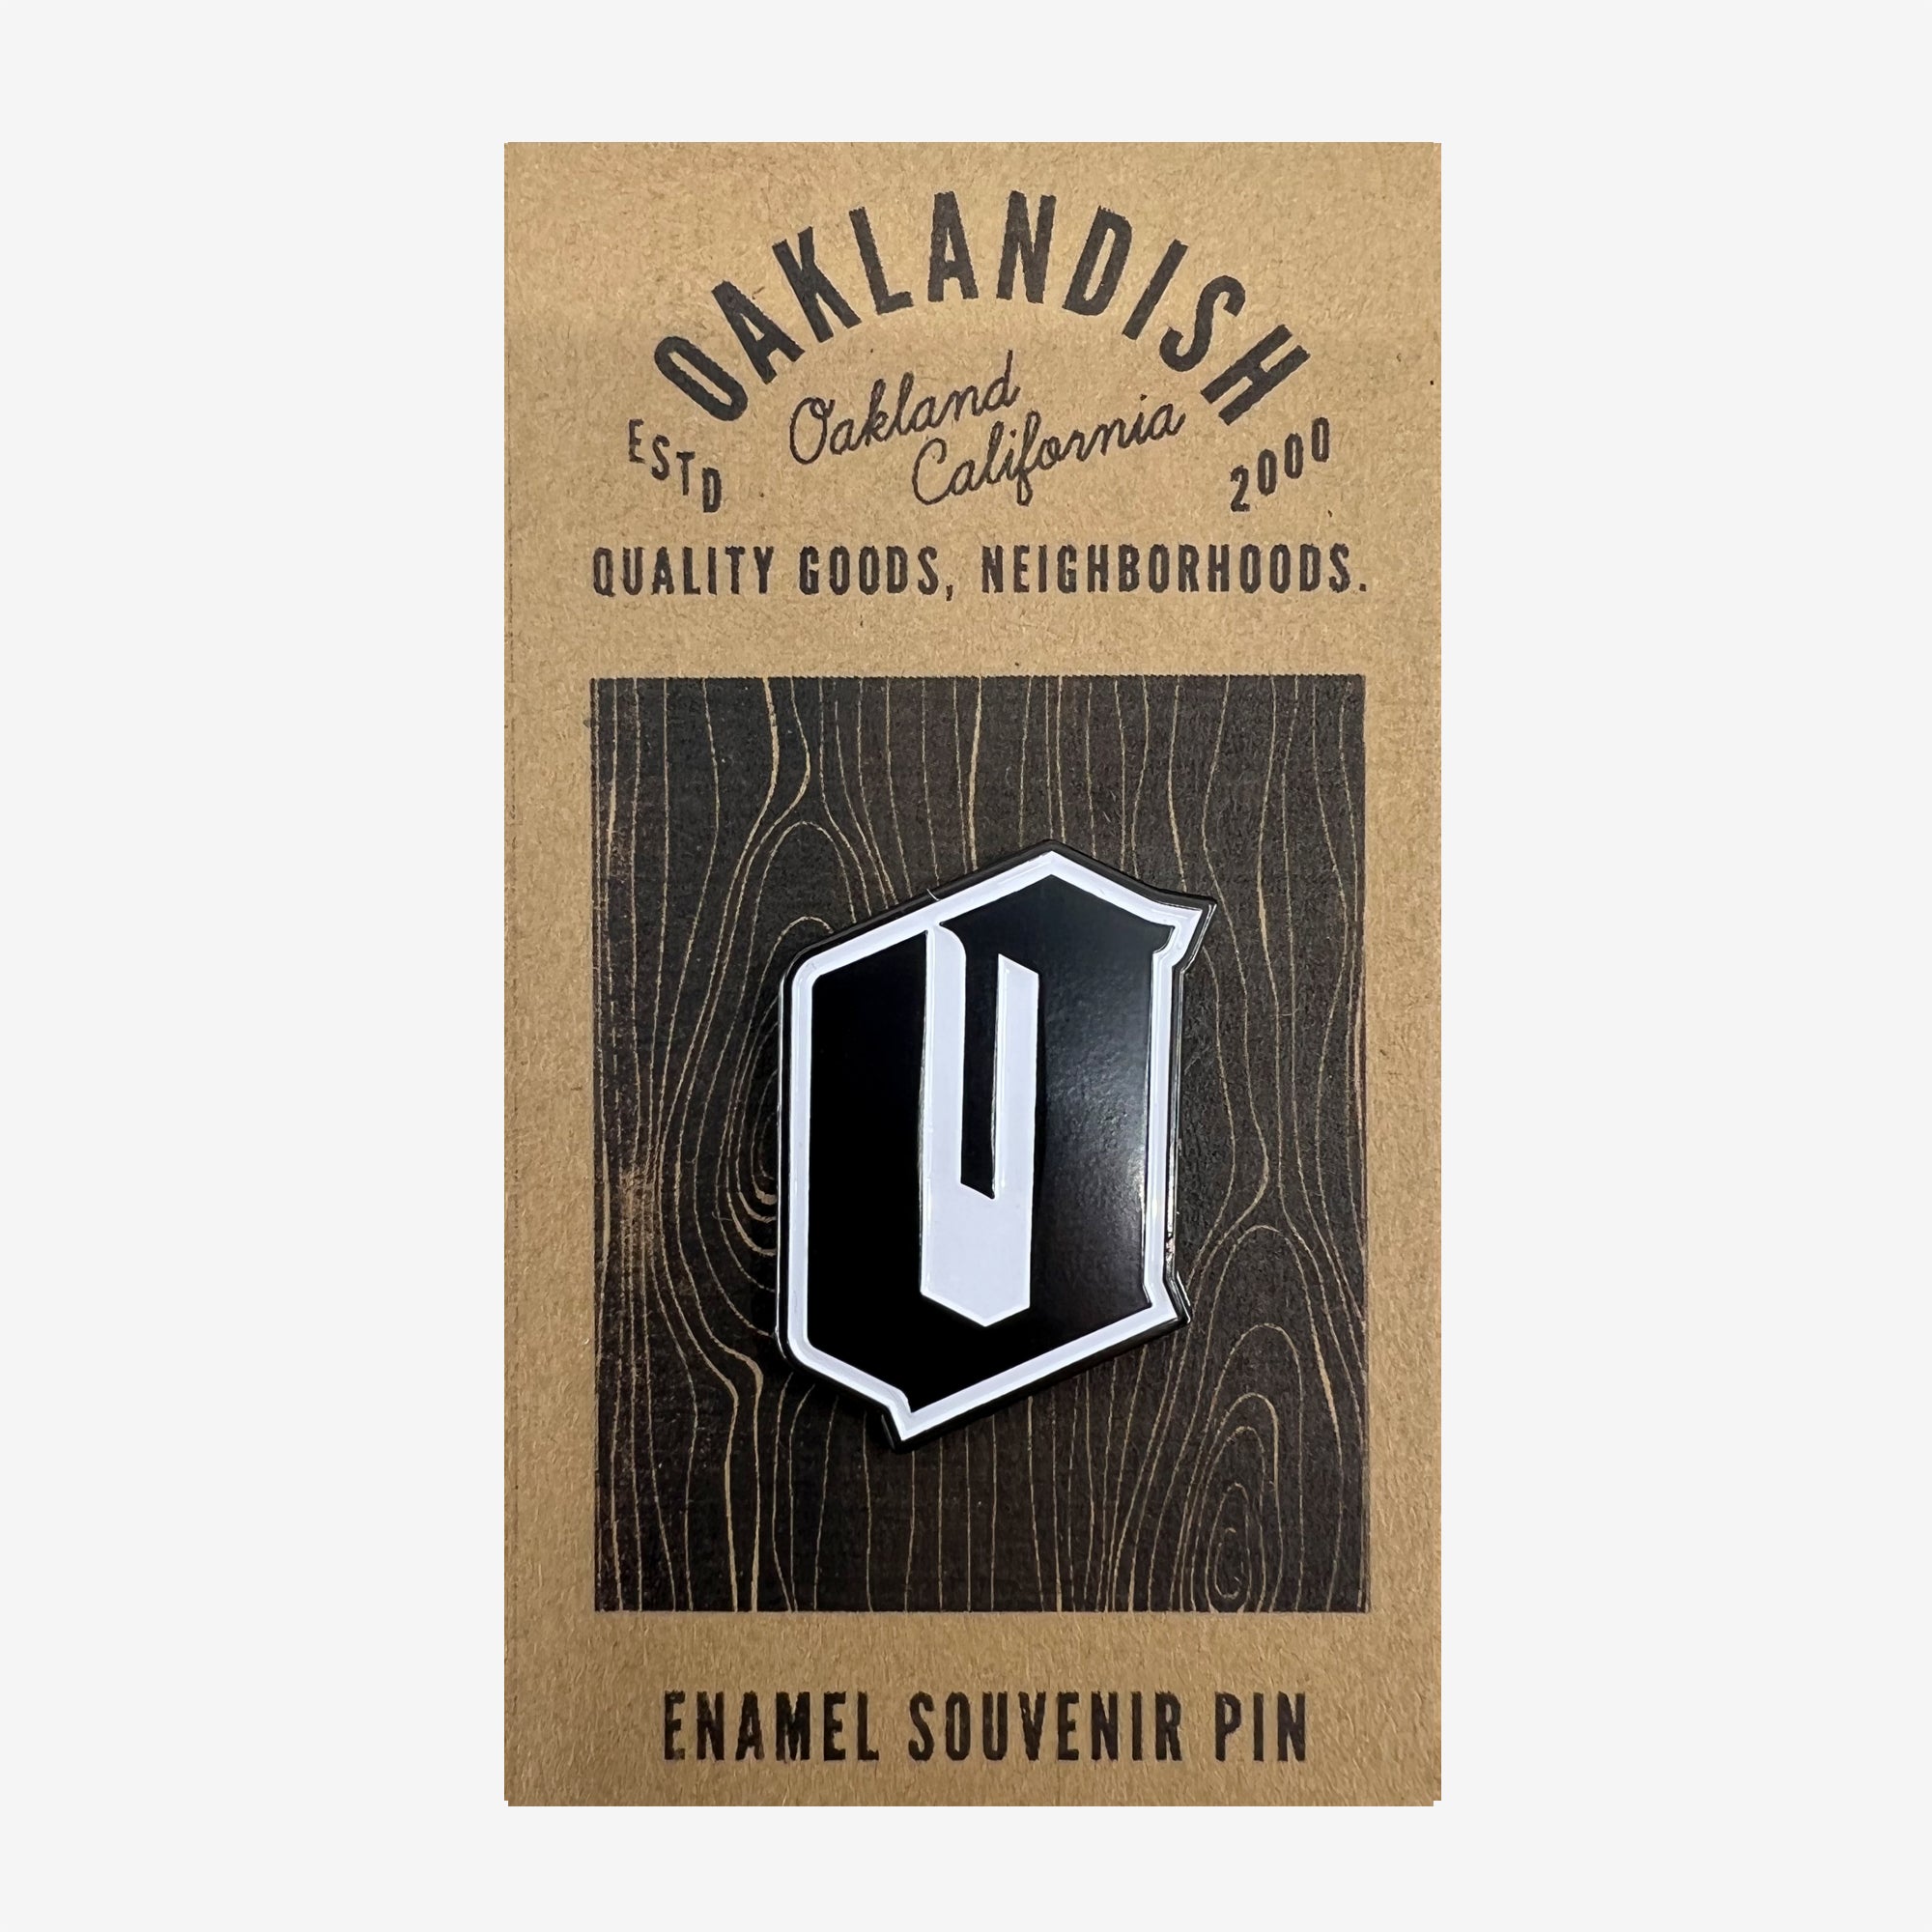 A black and white enamel lapel pin with O for Oakland on brown paper retail packaging with the words Enamel Souvenir Pin. 